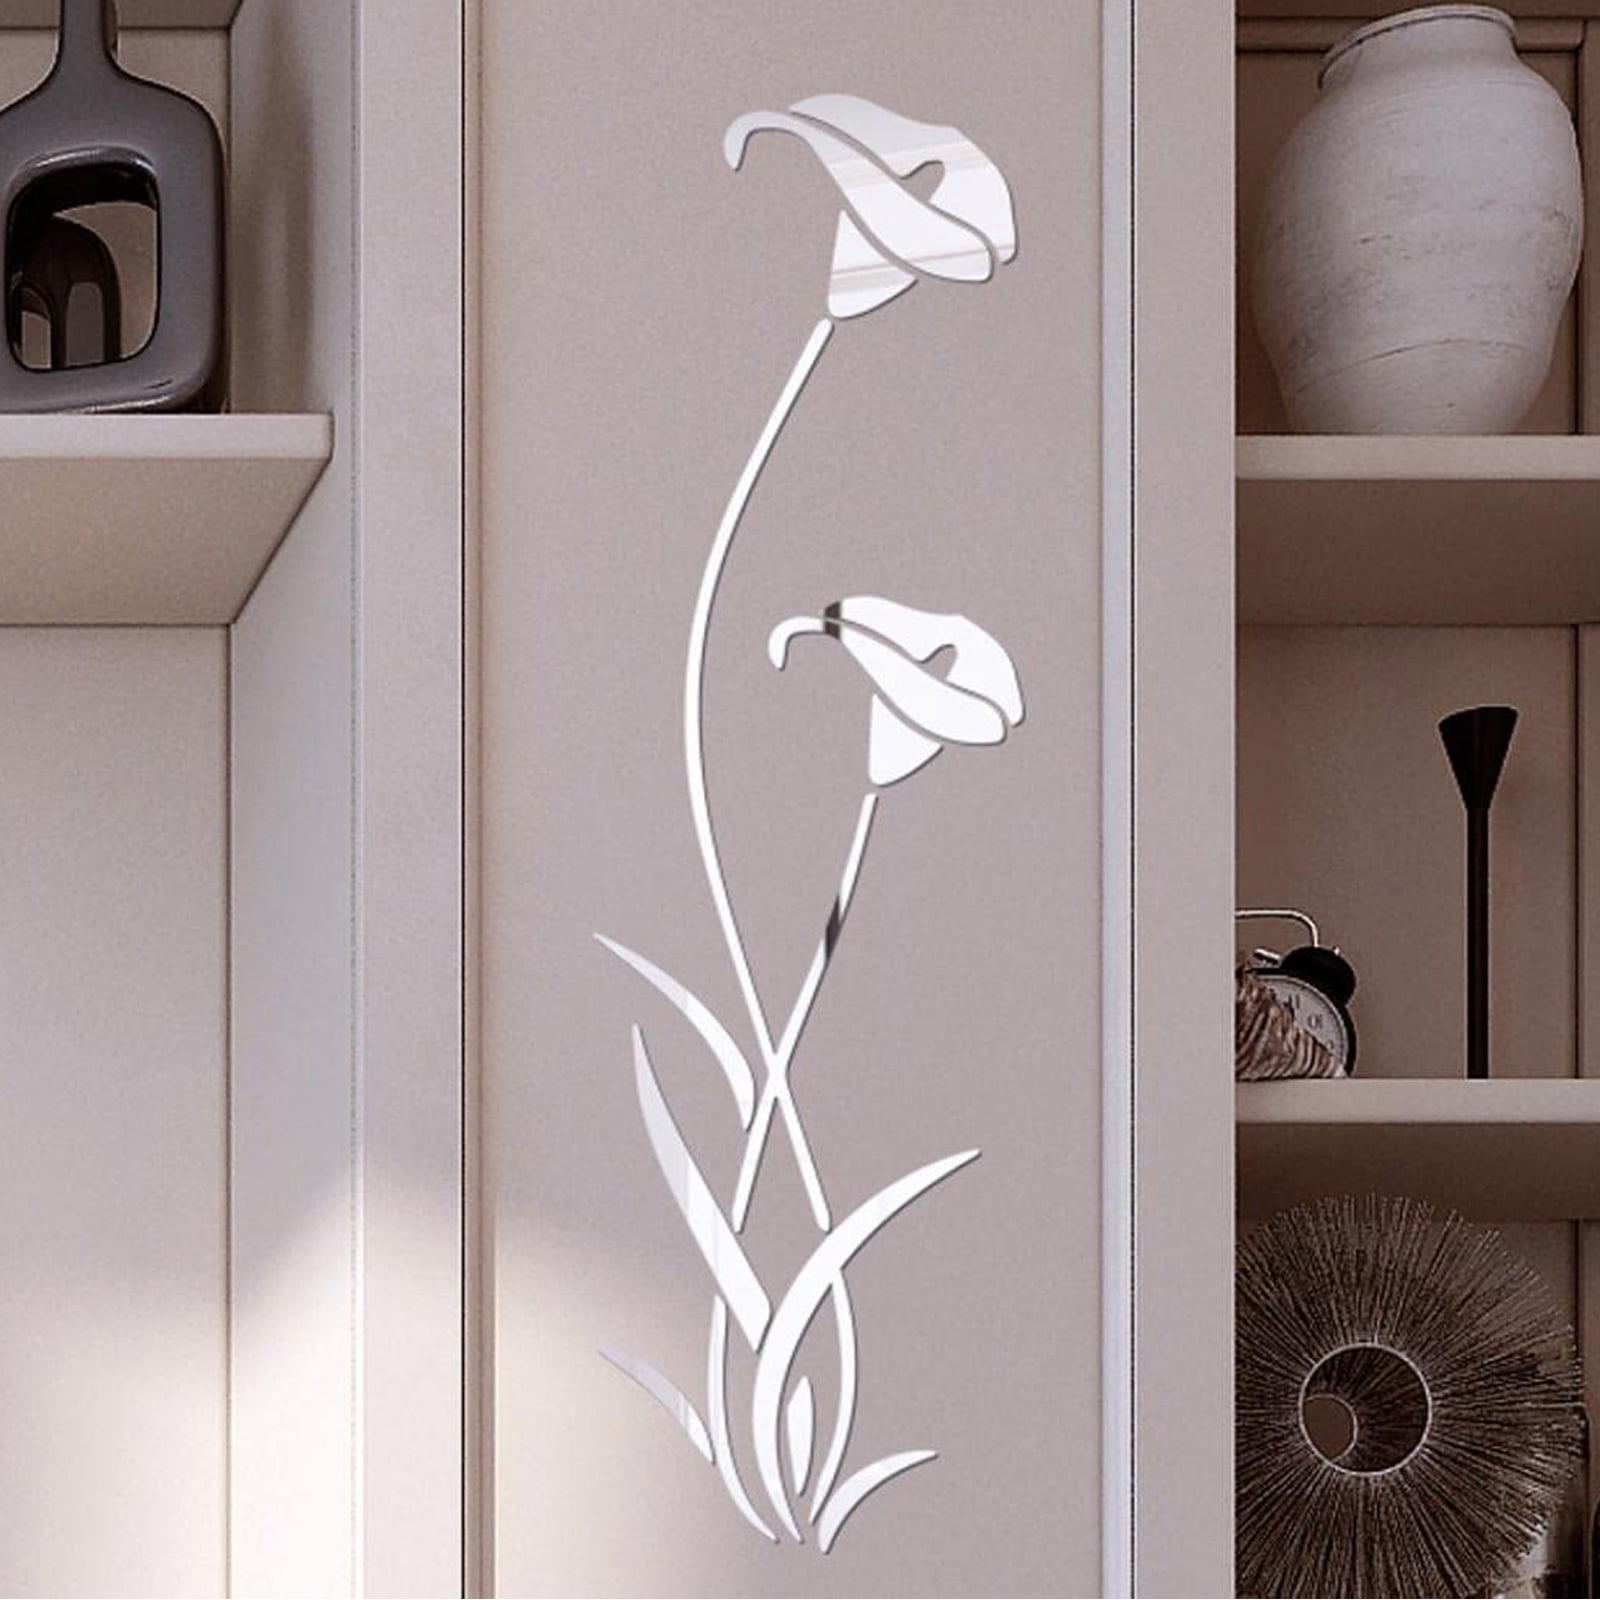 Shpwfbe room decor 3d Acrylic Mirror Wall Stickers Roses Diy Self Adhesive  Wall Art Home Removable Living Bed Bath Office 